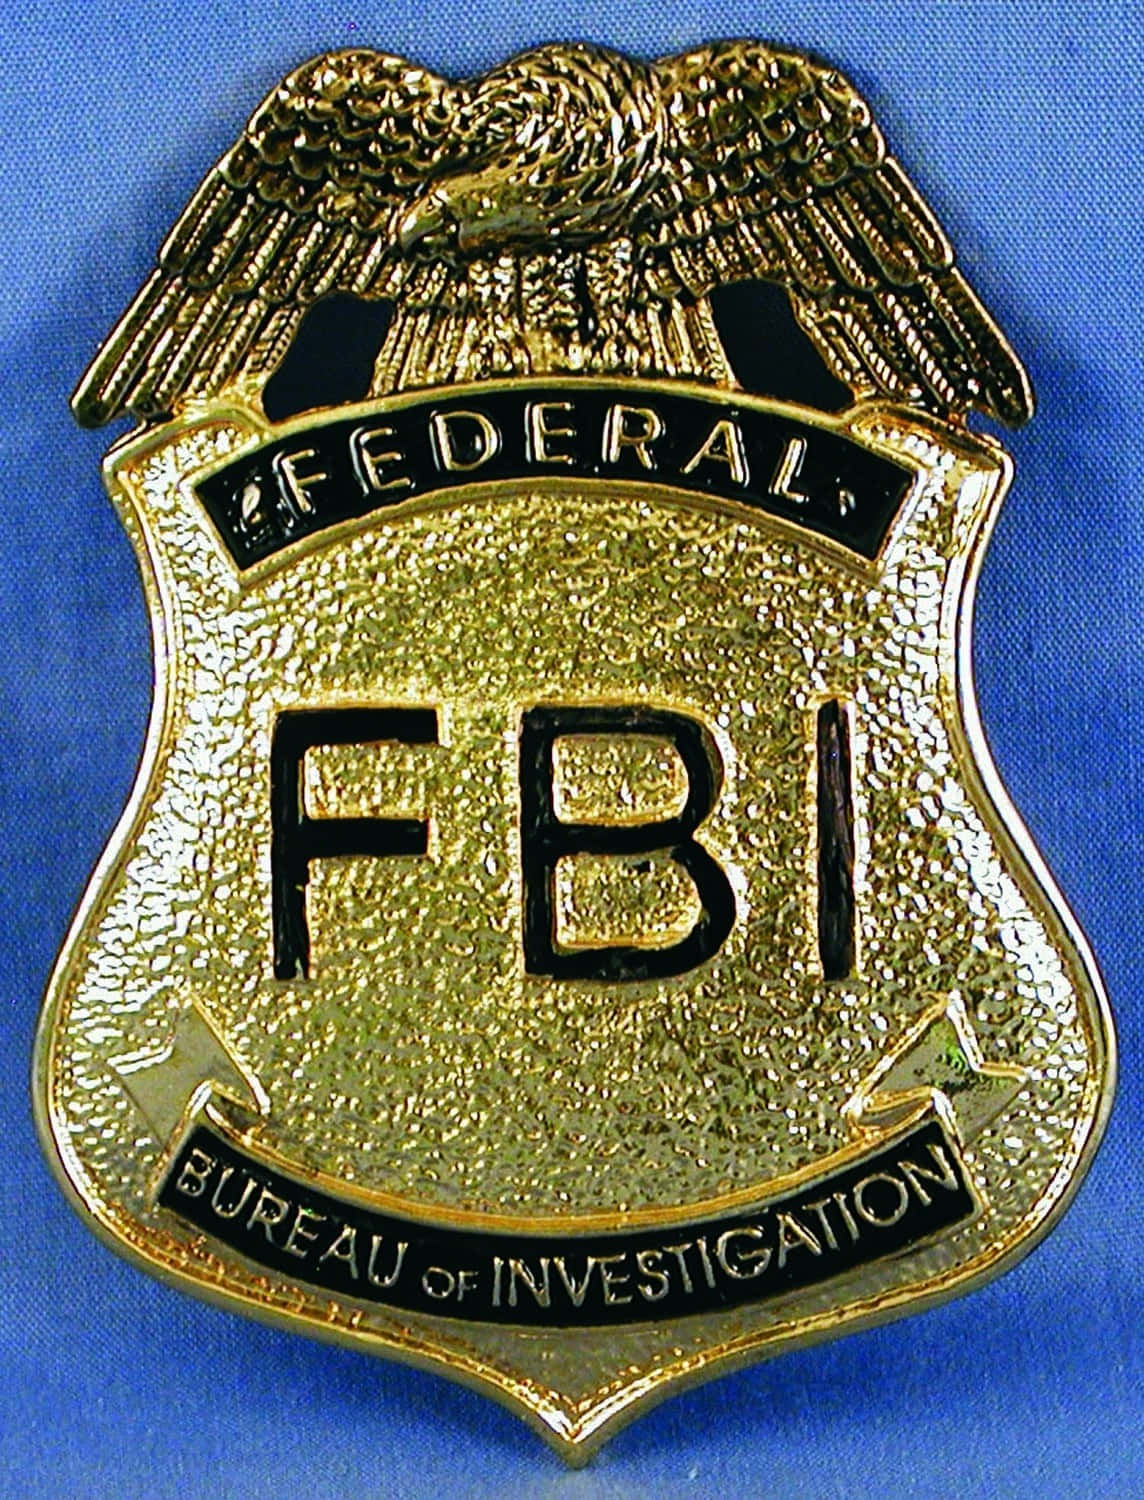 Agents of the Federal Bureau of Investigation (FBI) carrying out an investigation